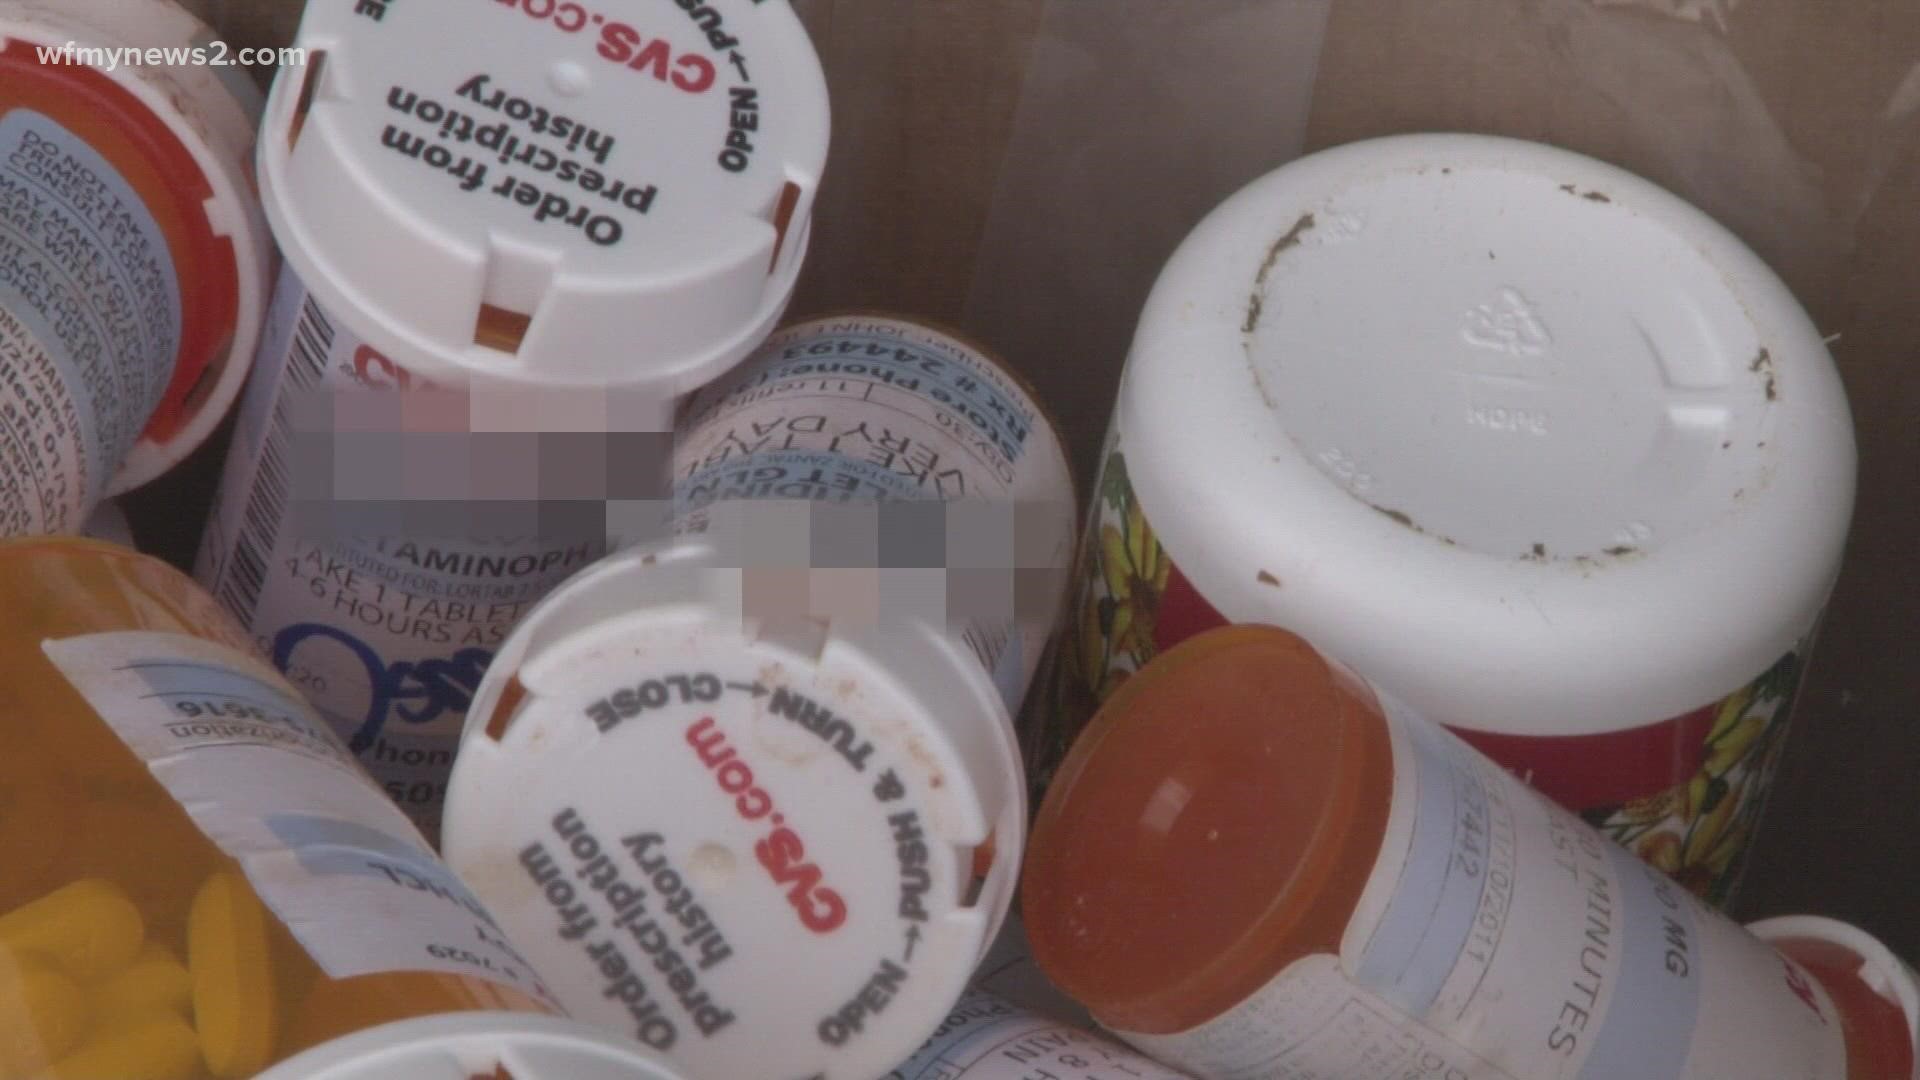 A Triad group will host a takeback event for National Drug Take-Back Day.